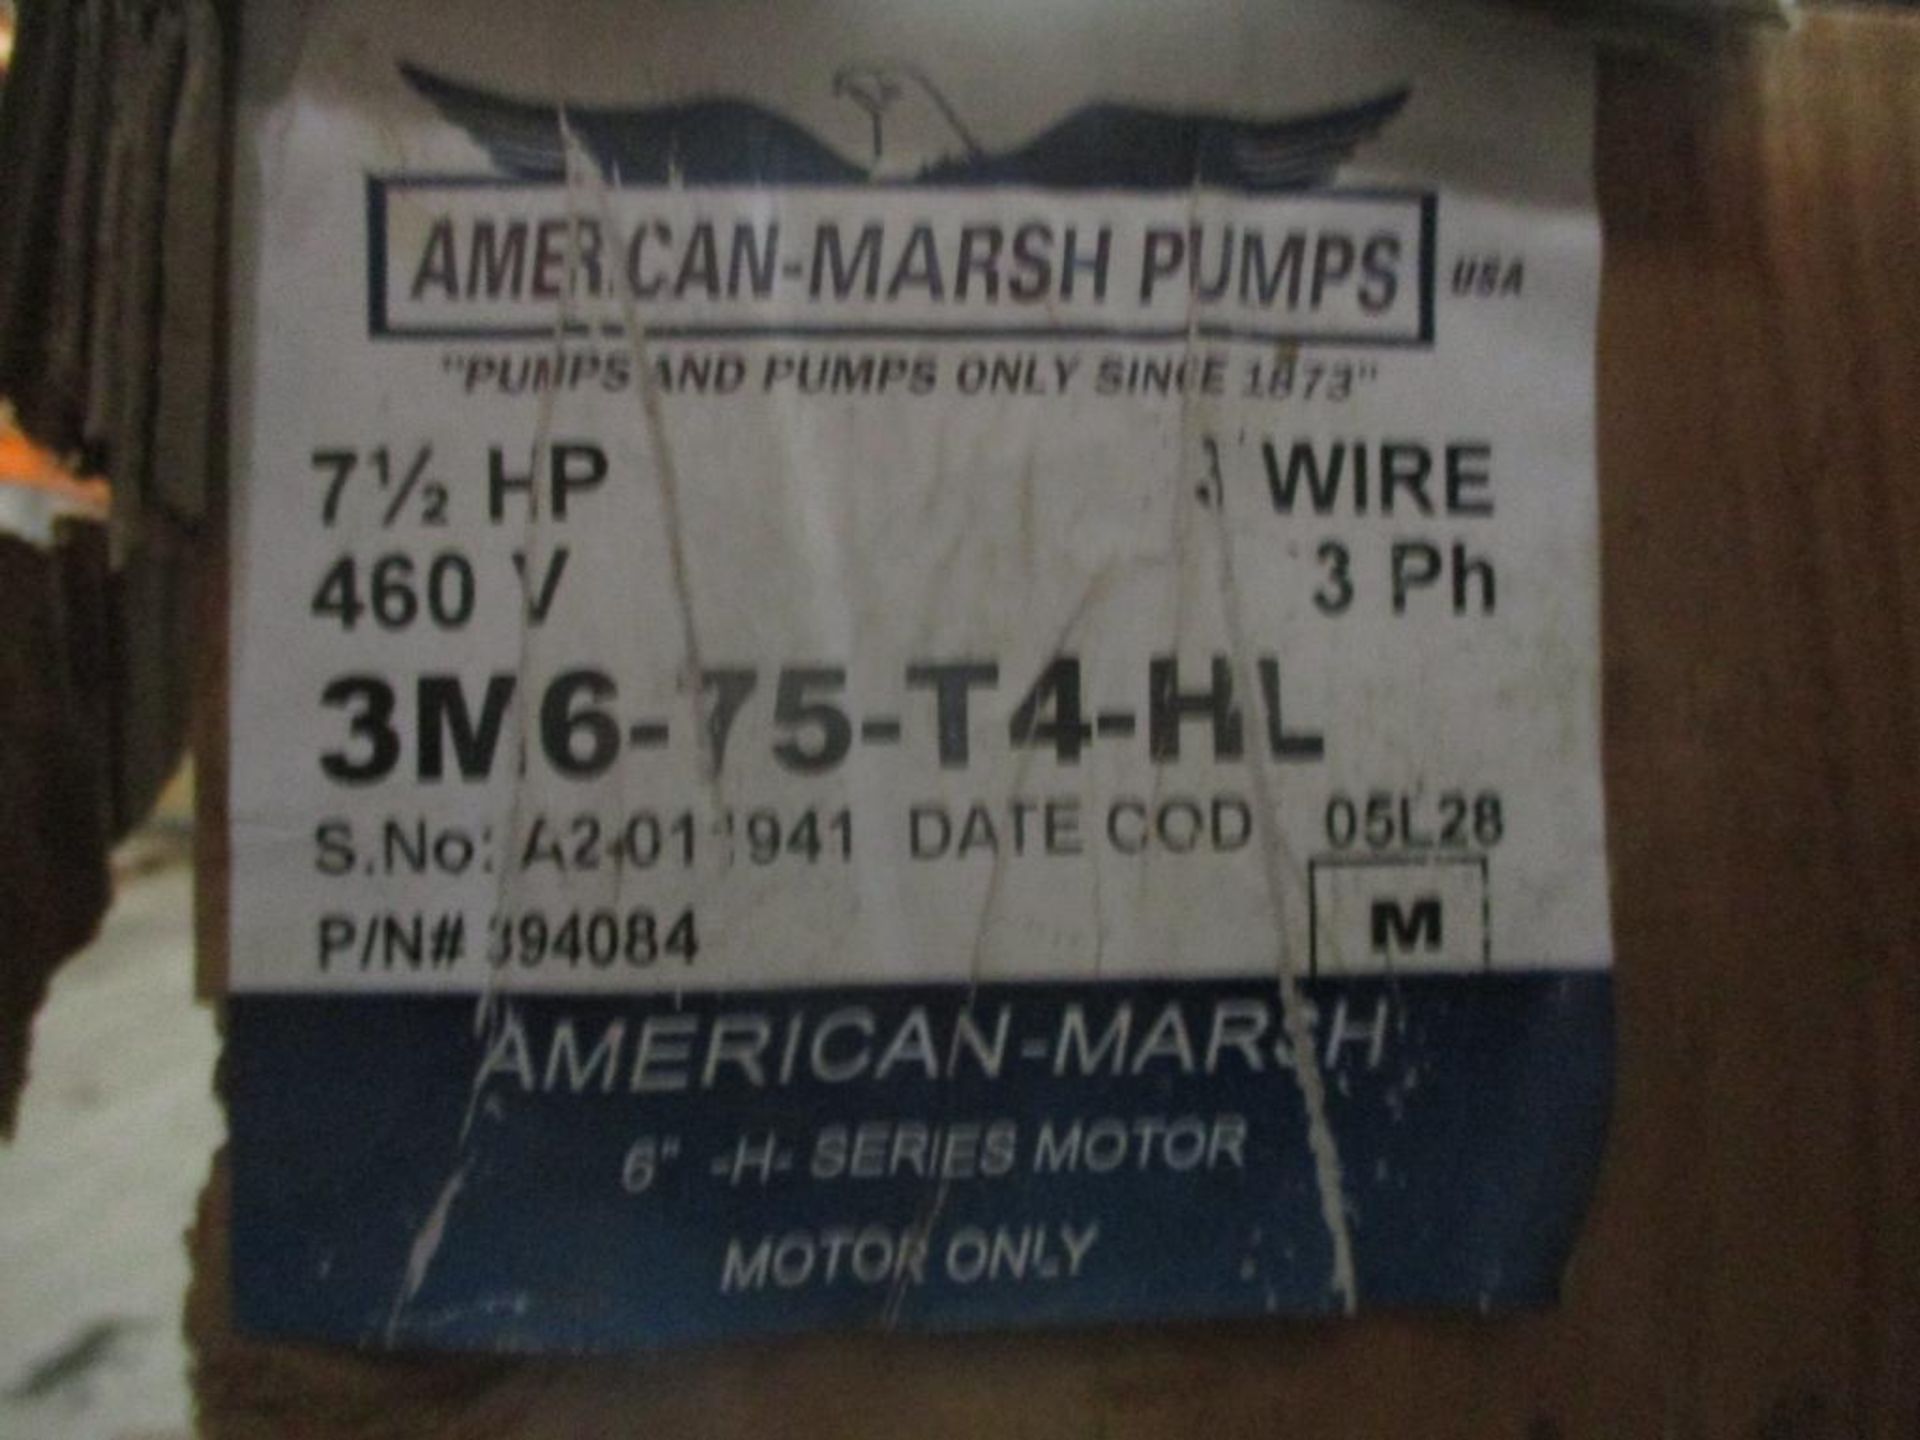 (3) American Marsh 7-1/2 HP Submersible Motors, 3M6-7S-T4-HL, 3-Wire, 460 V - Image 4 of 4